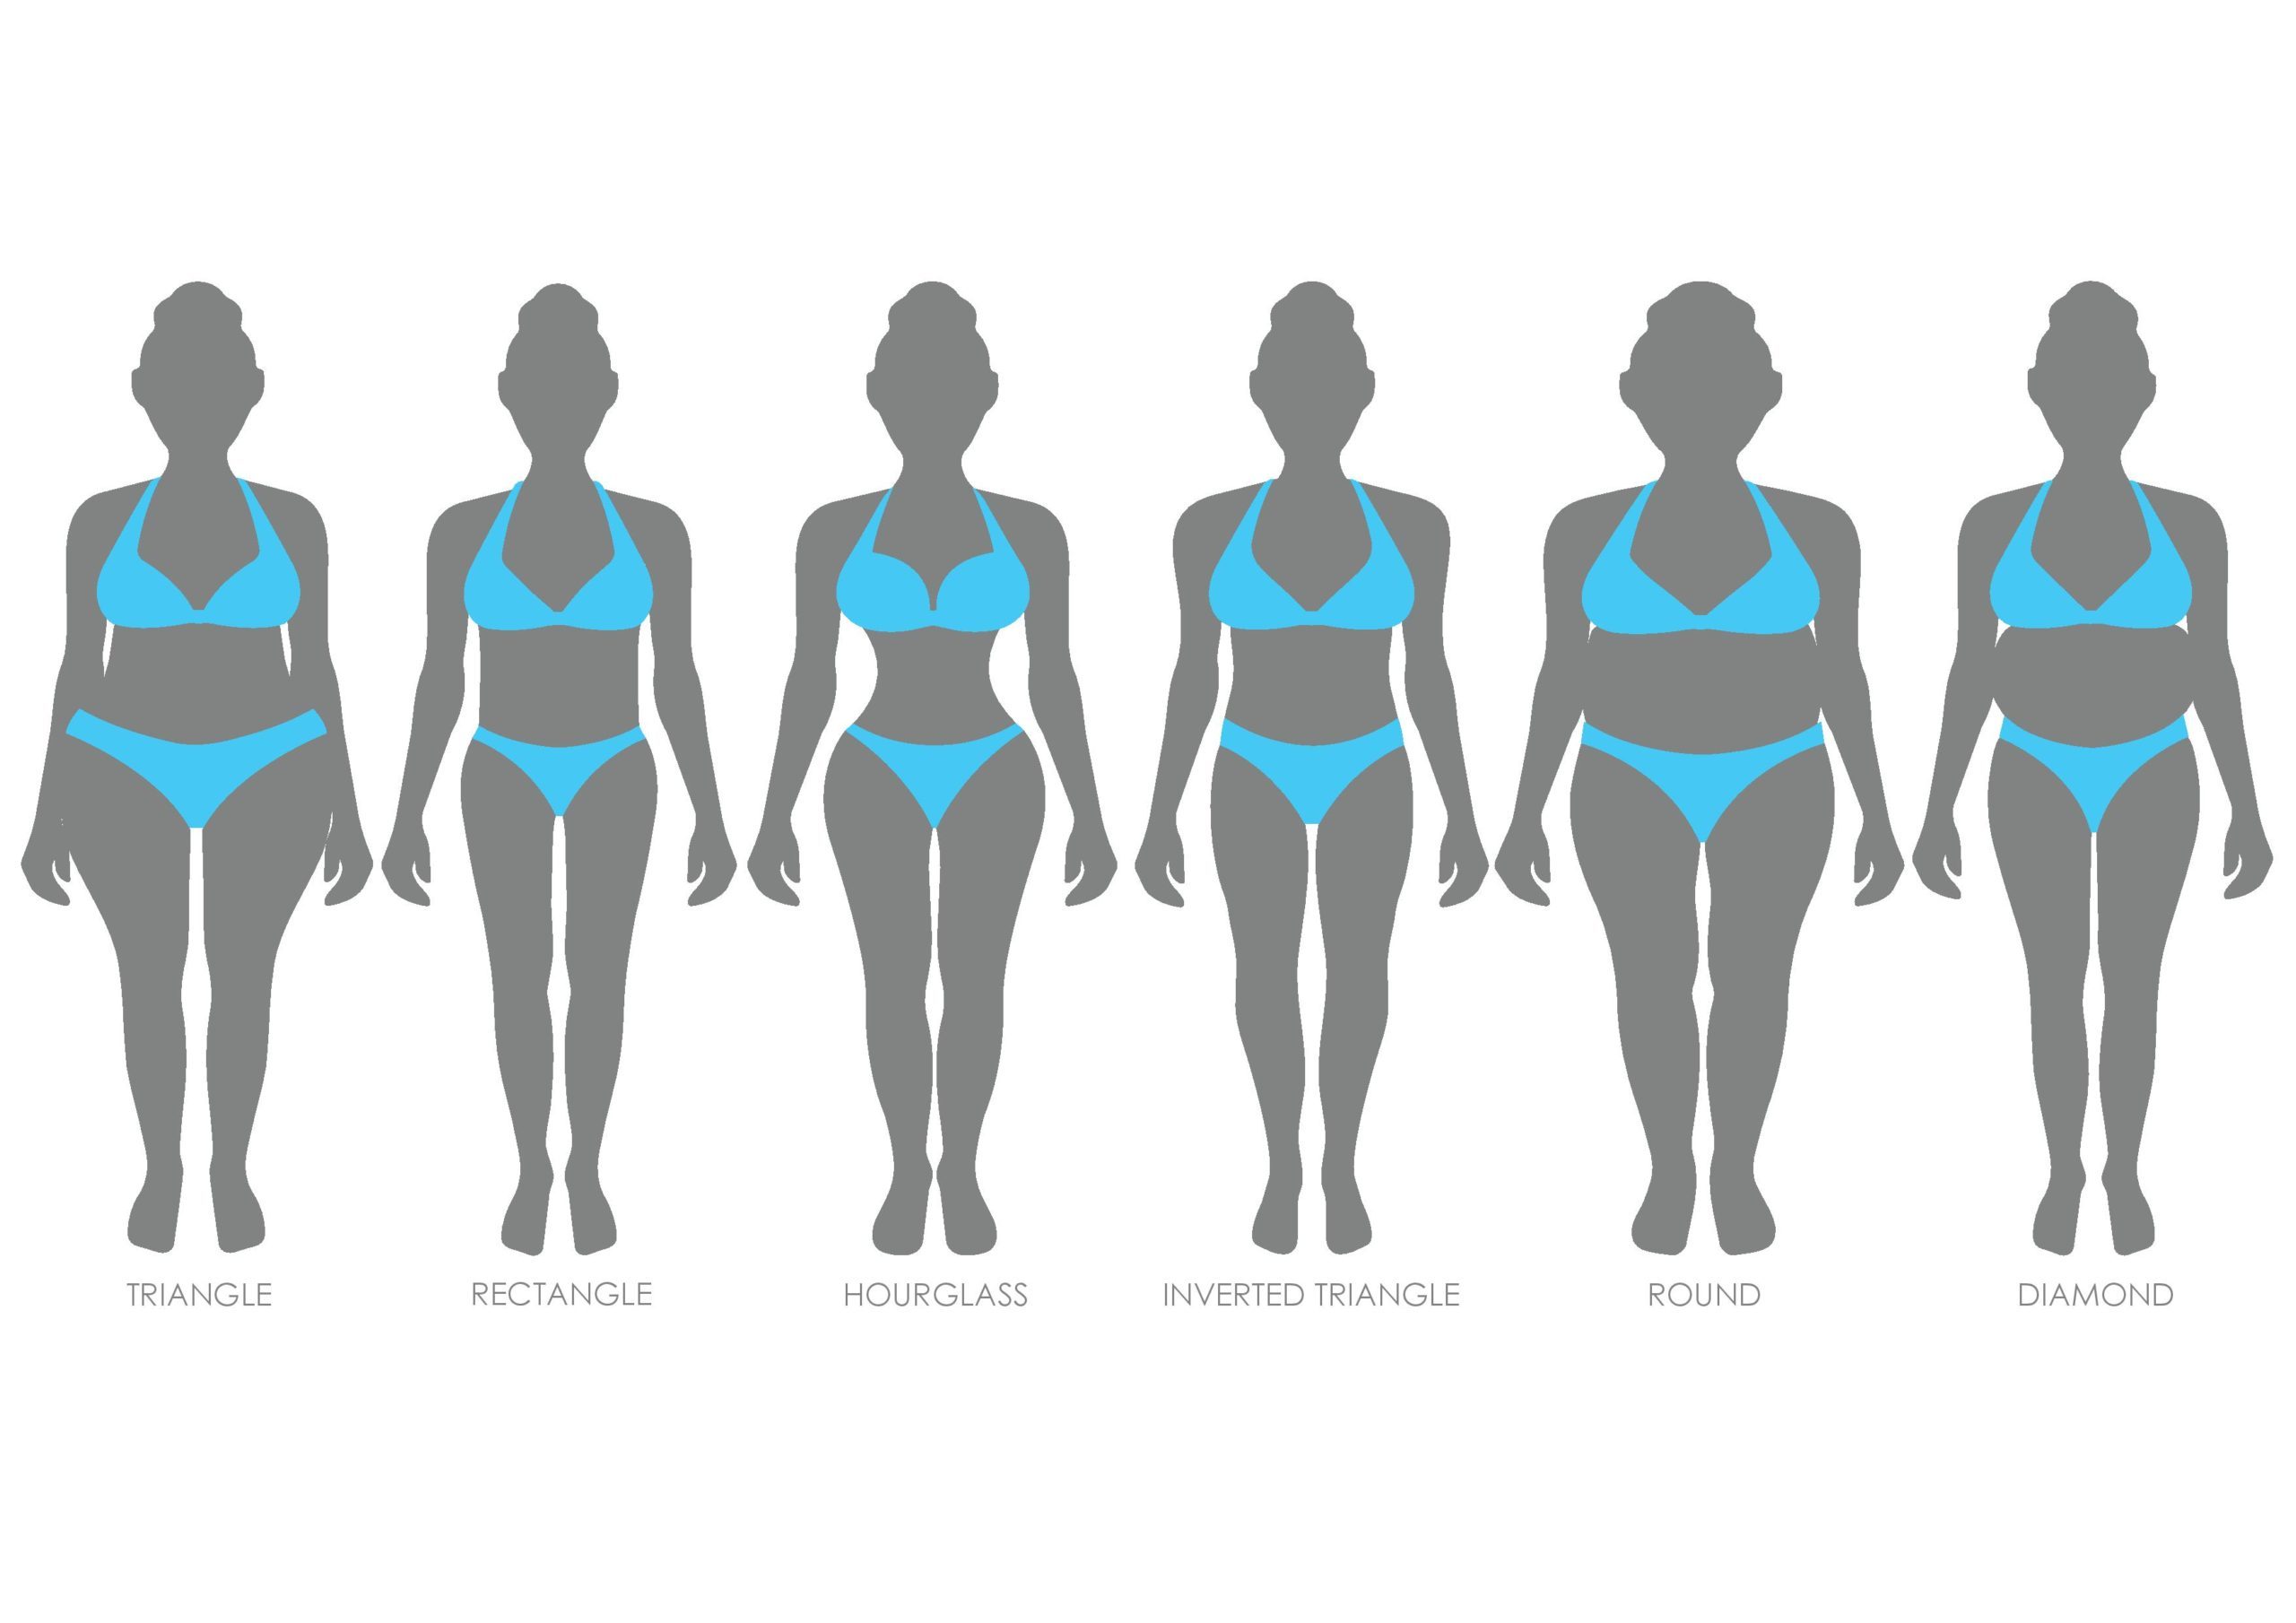 What is Body Shaping? What You Need to Know